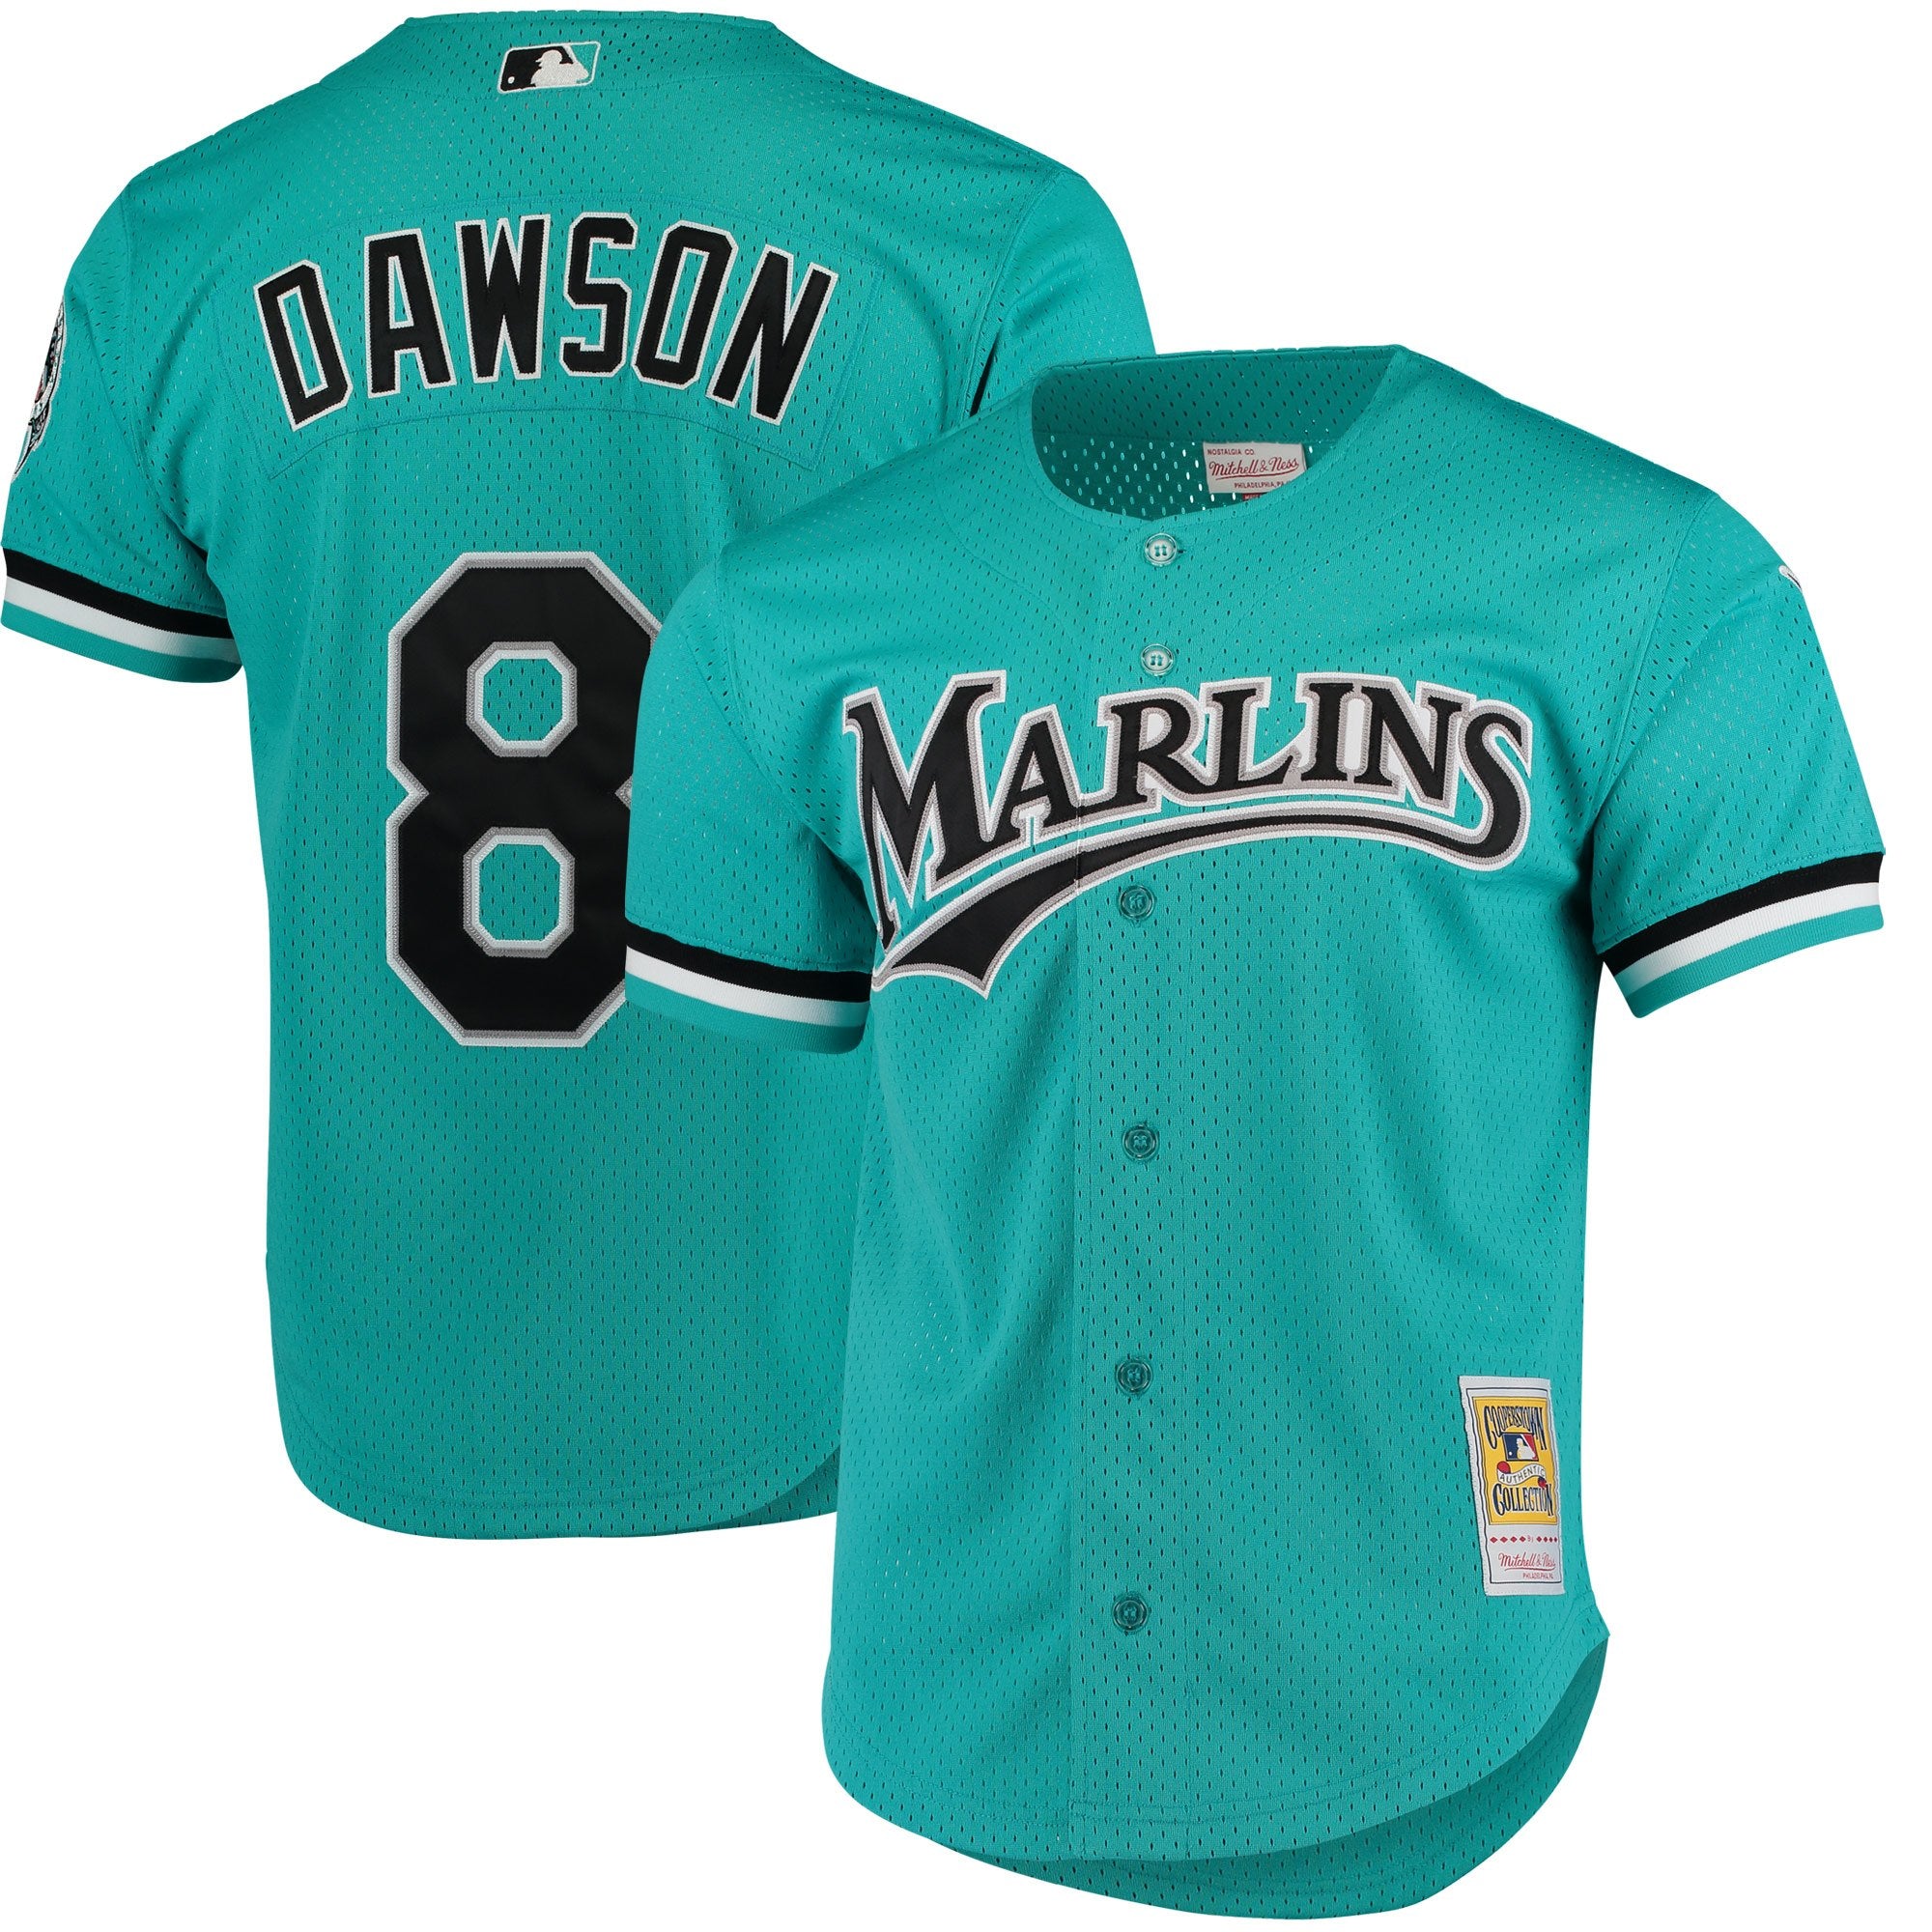 Majestic MLB Jersey Sz Large Diamond Collection Florida Marlins Teal Used